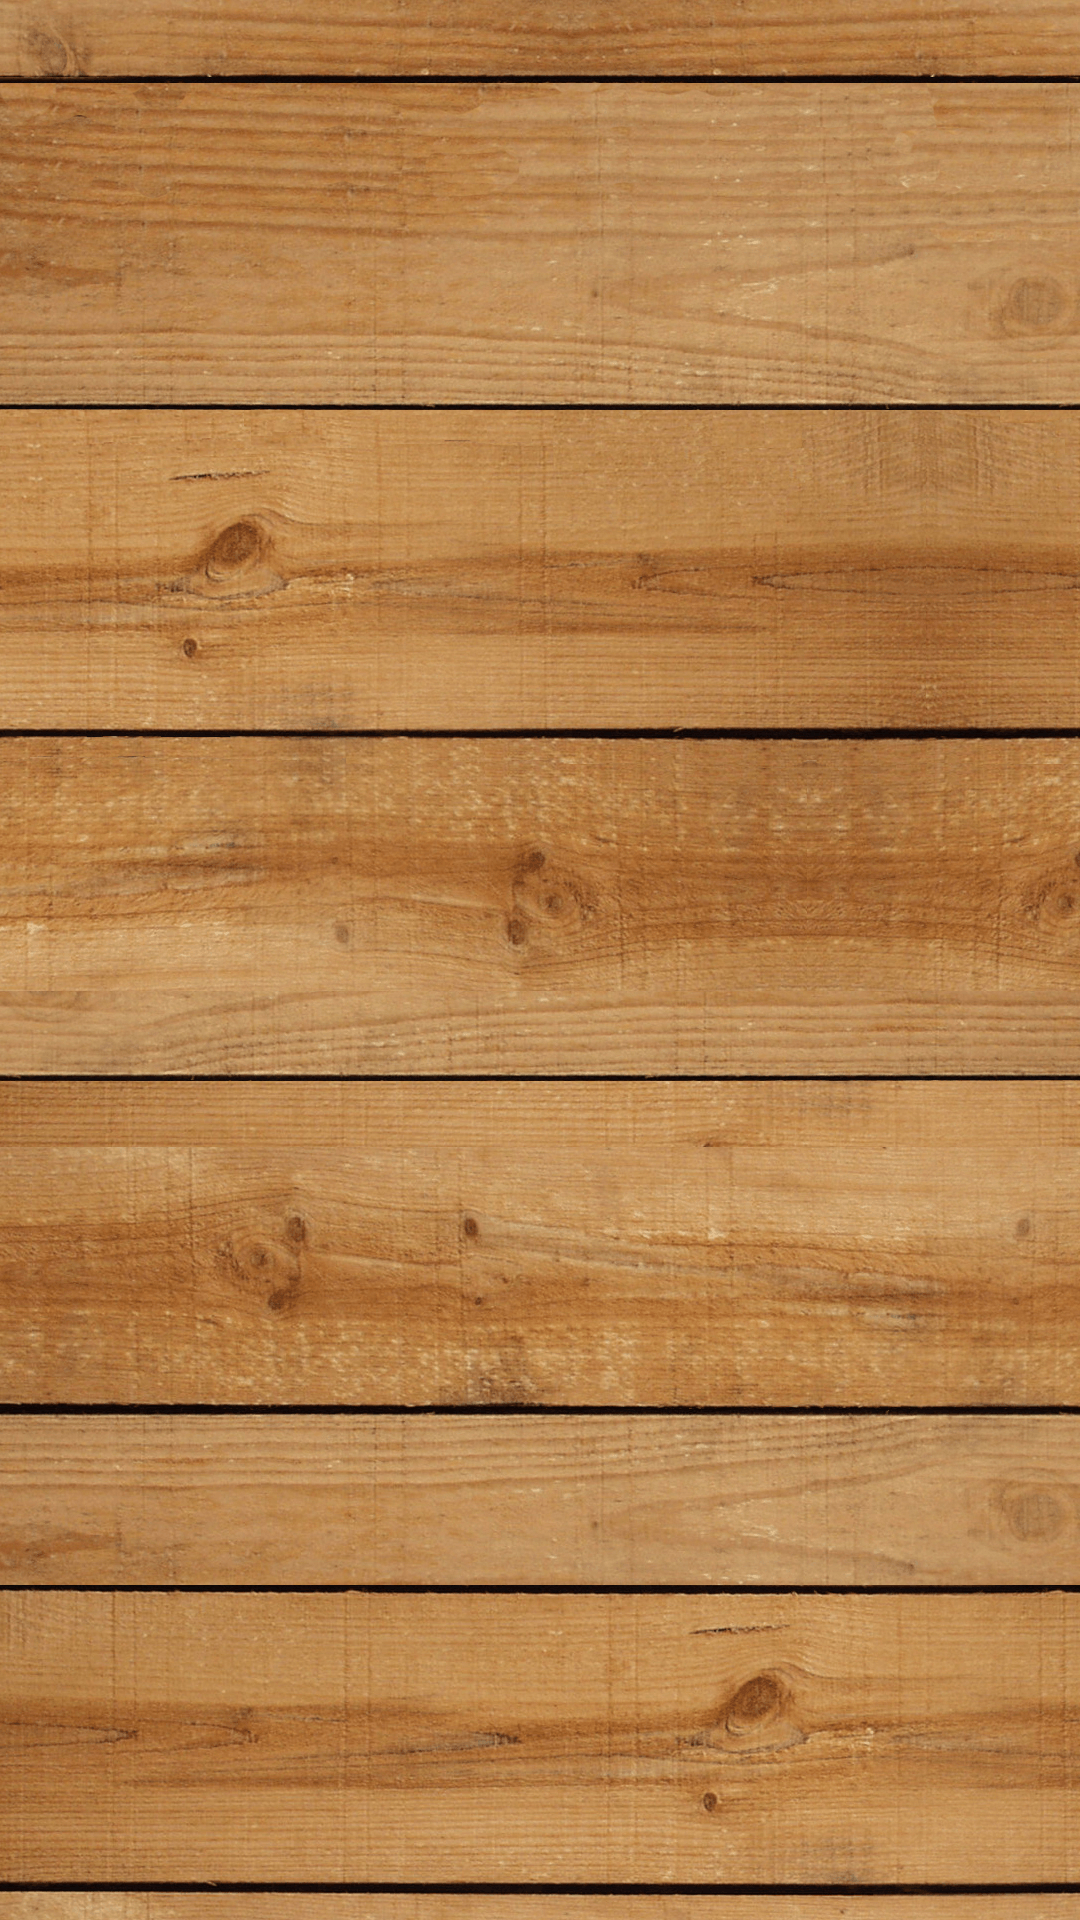 Android Wood Panels background #wallpaper1080x1920. SMARTPHONE